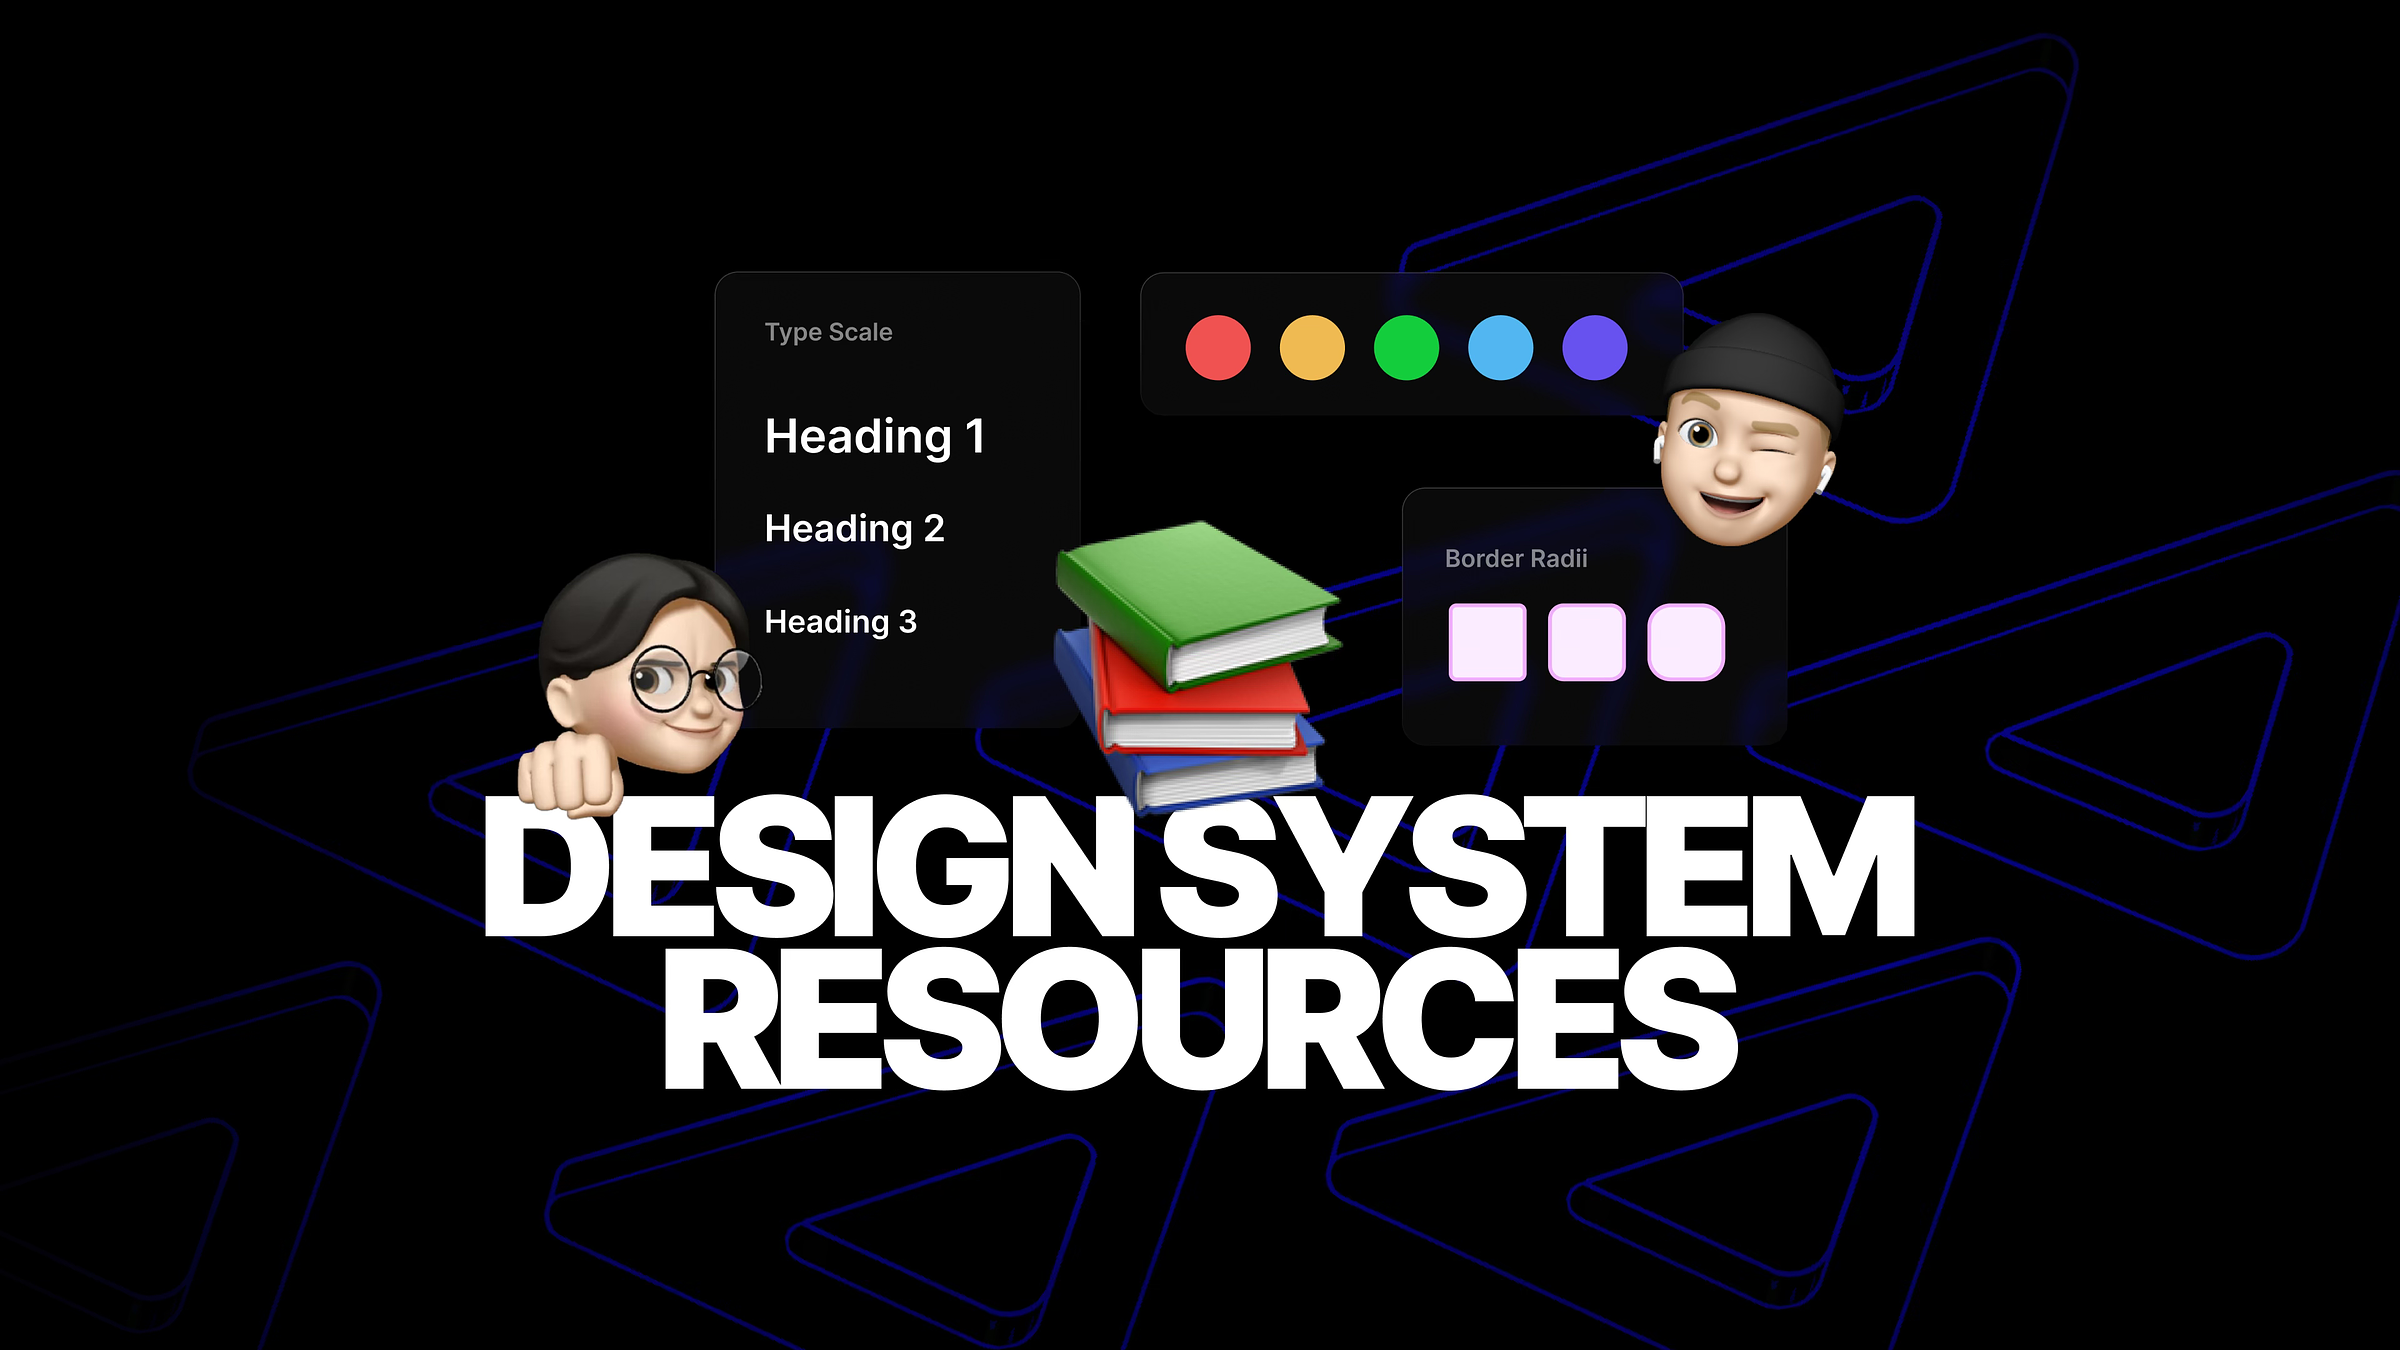 Into Design System Resources